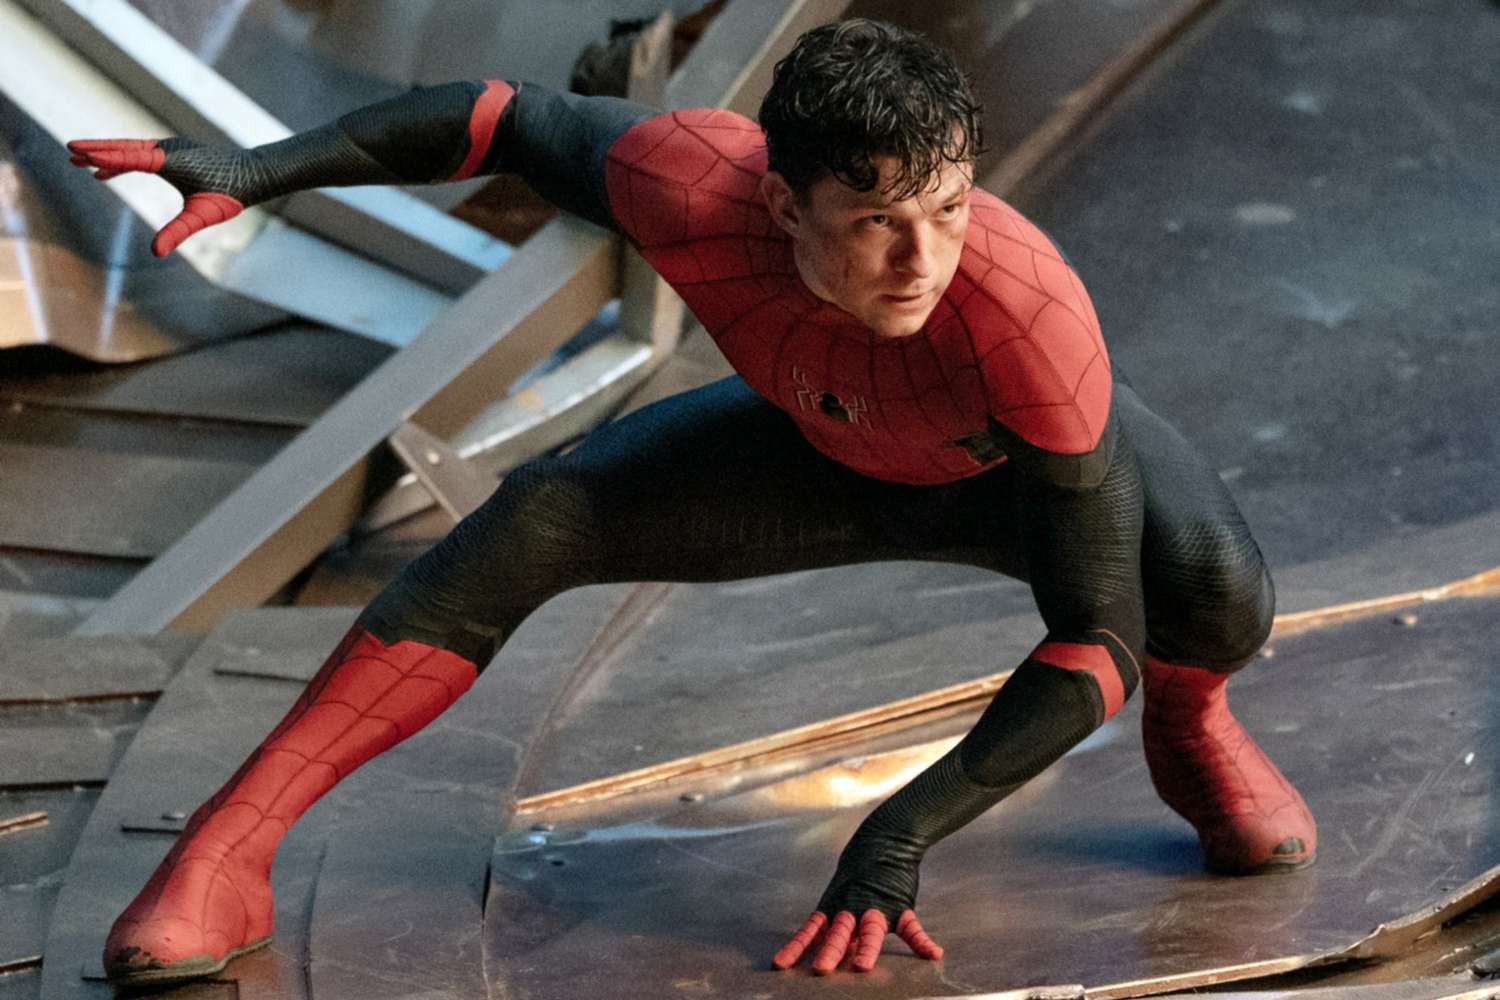 Tom Holland has had a great run as Spider-Man in the MCU